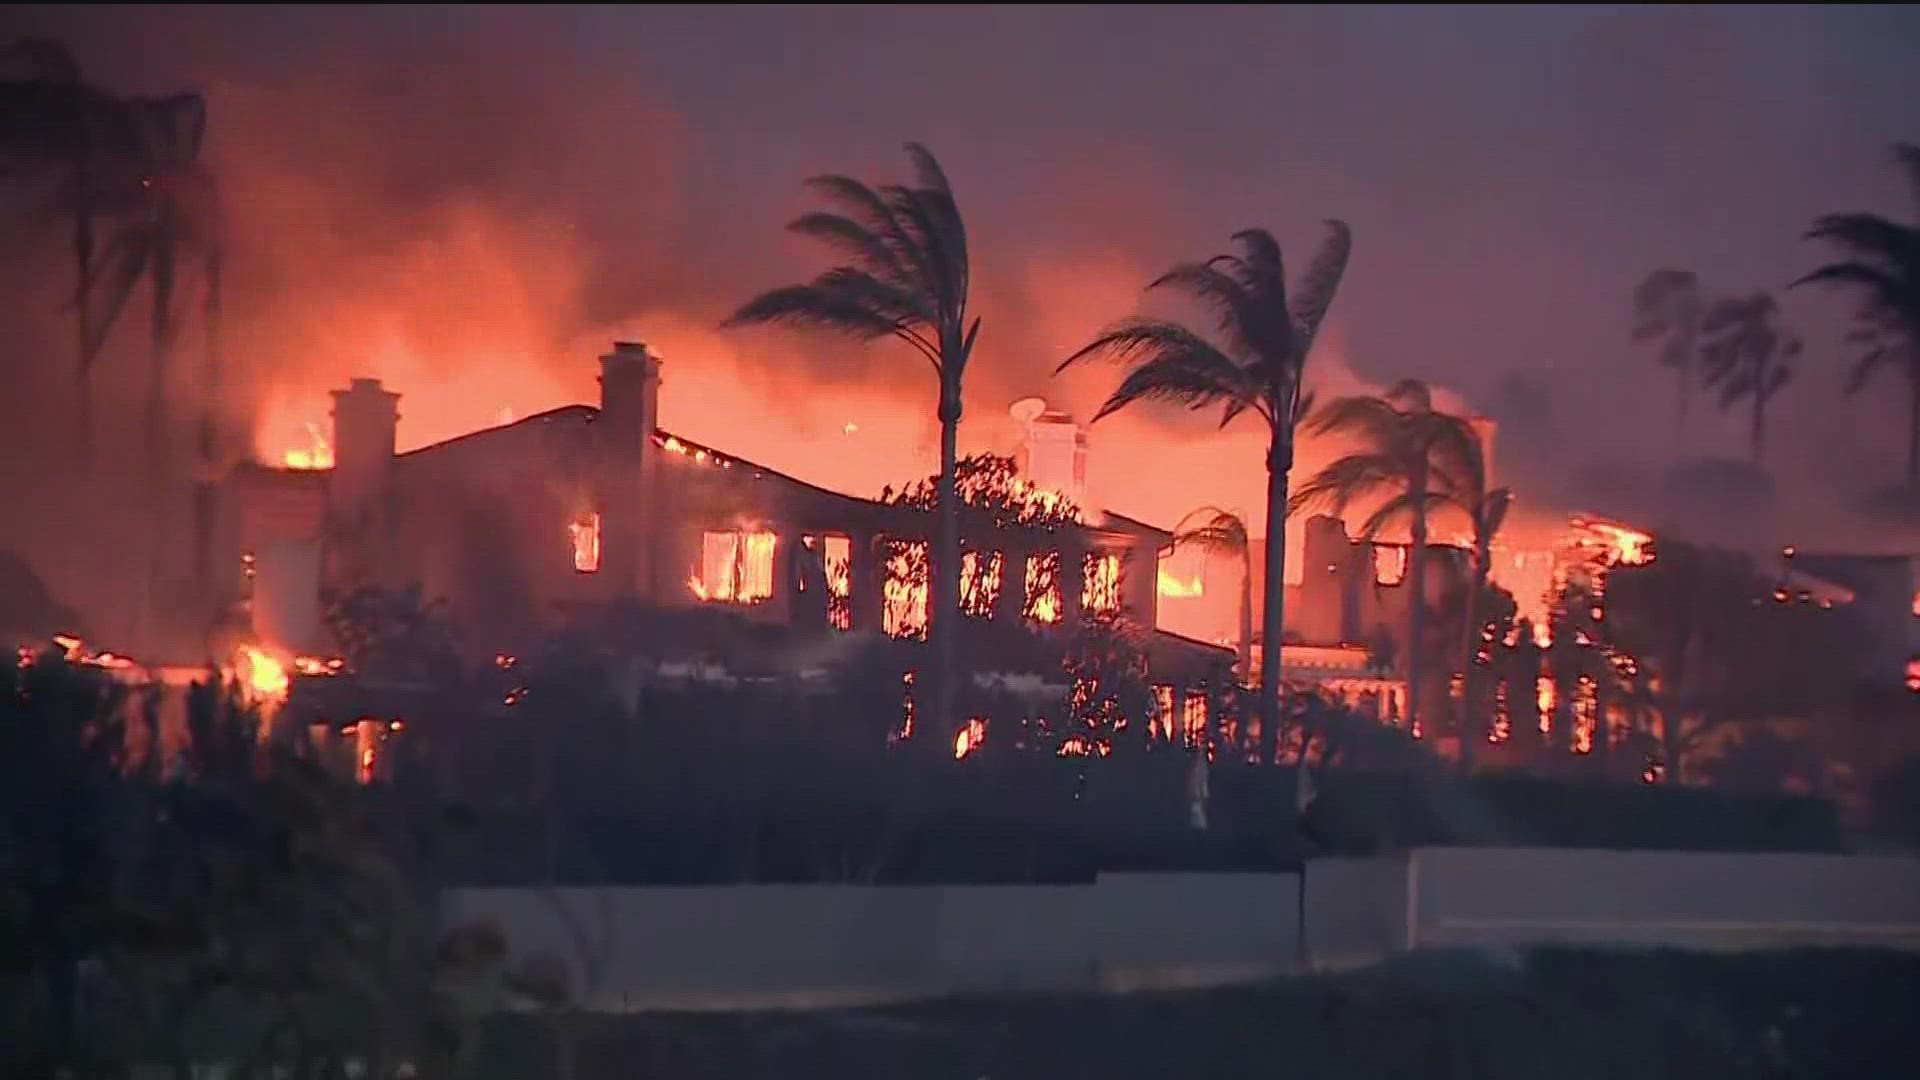 San Diego-area firefighters from various agencies, including Chula Vista, San Diego, National City, Poway and Heartland Fire were sent to help battle the flames.